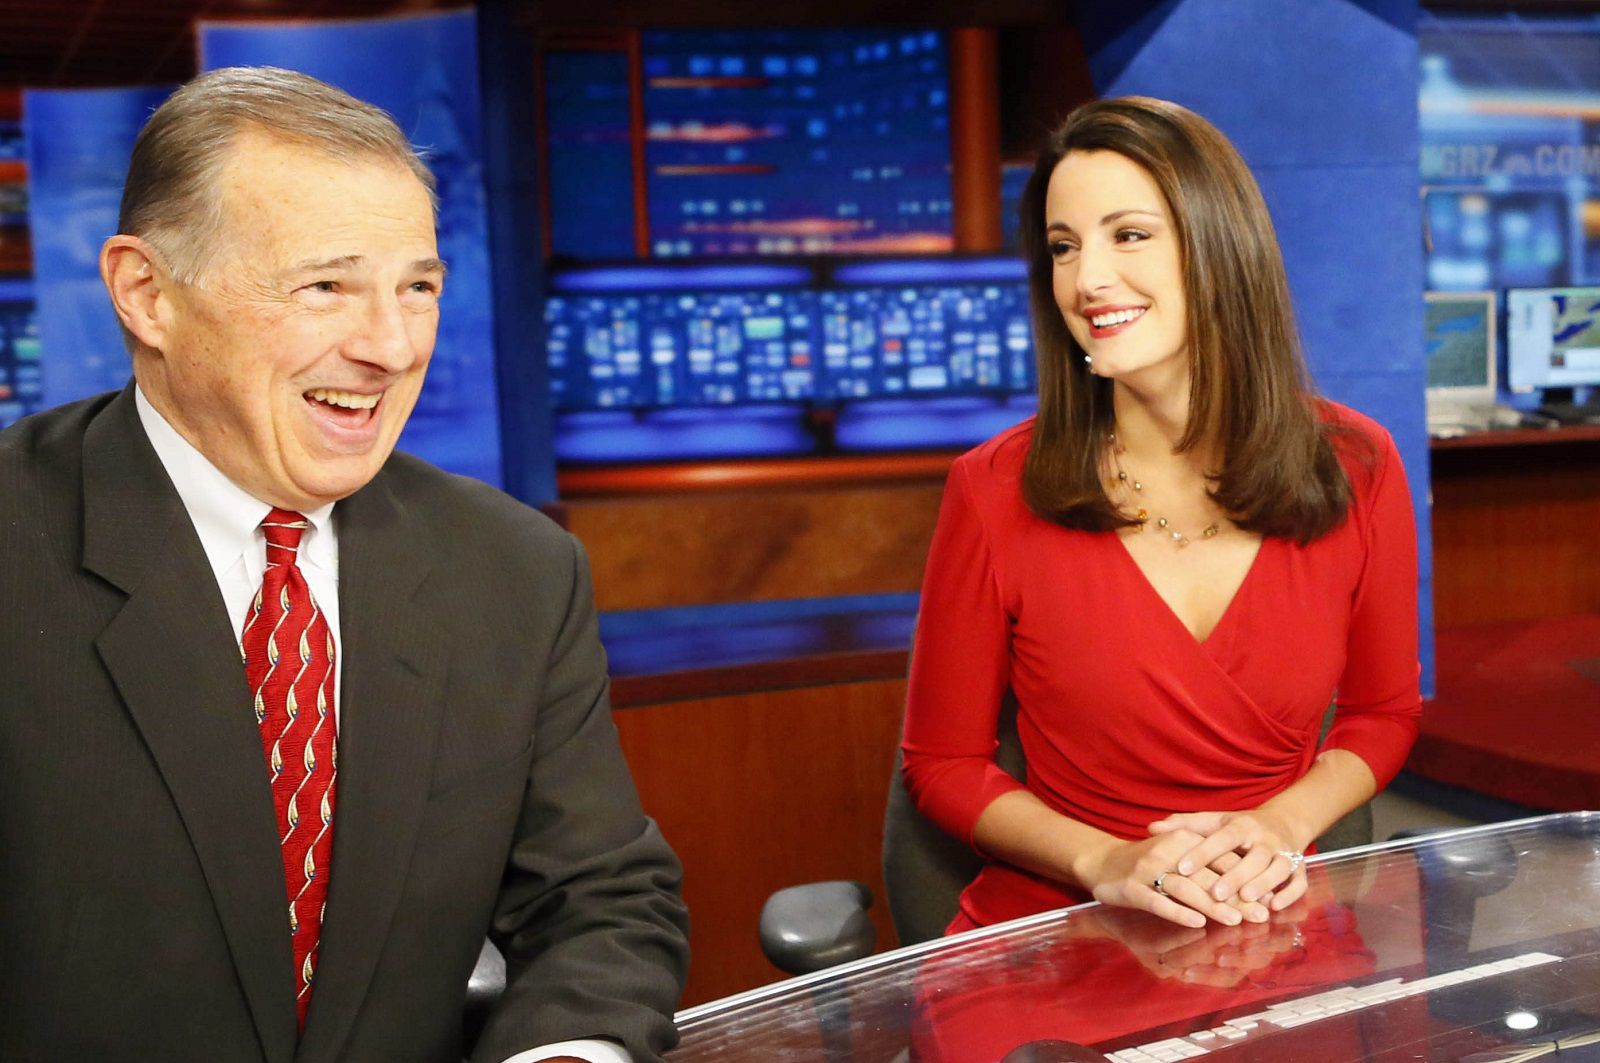 WGRZ is big winner in local news ratings during February sweeps